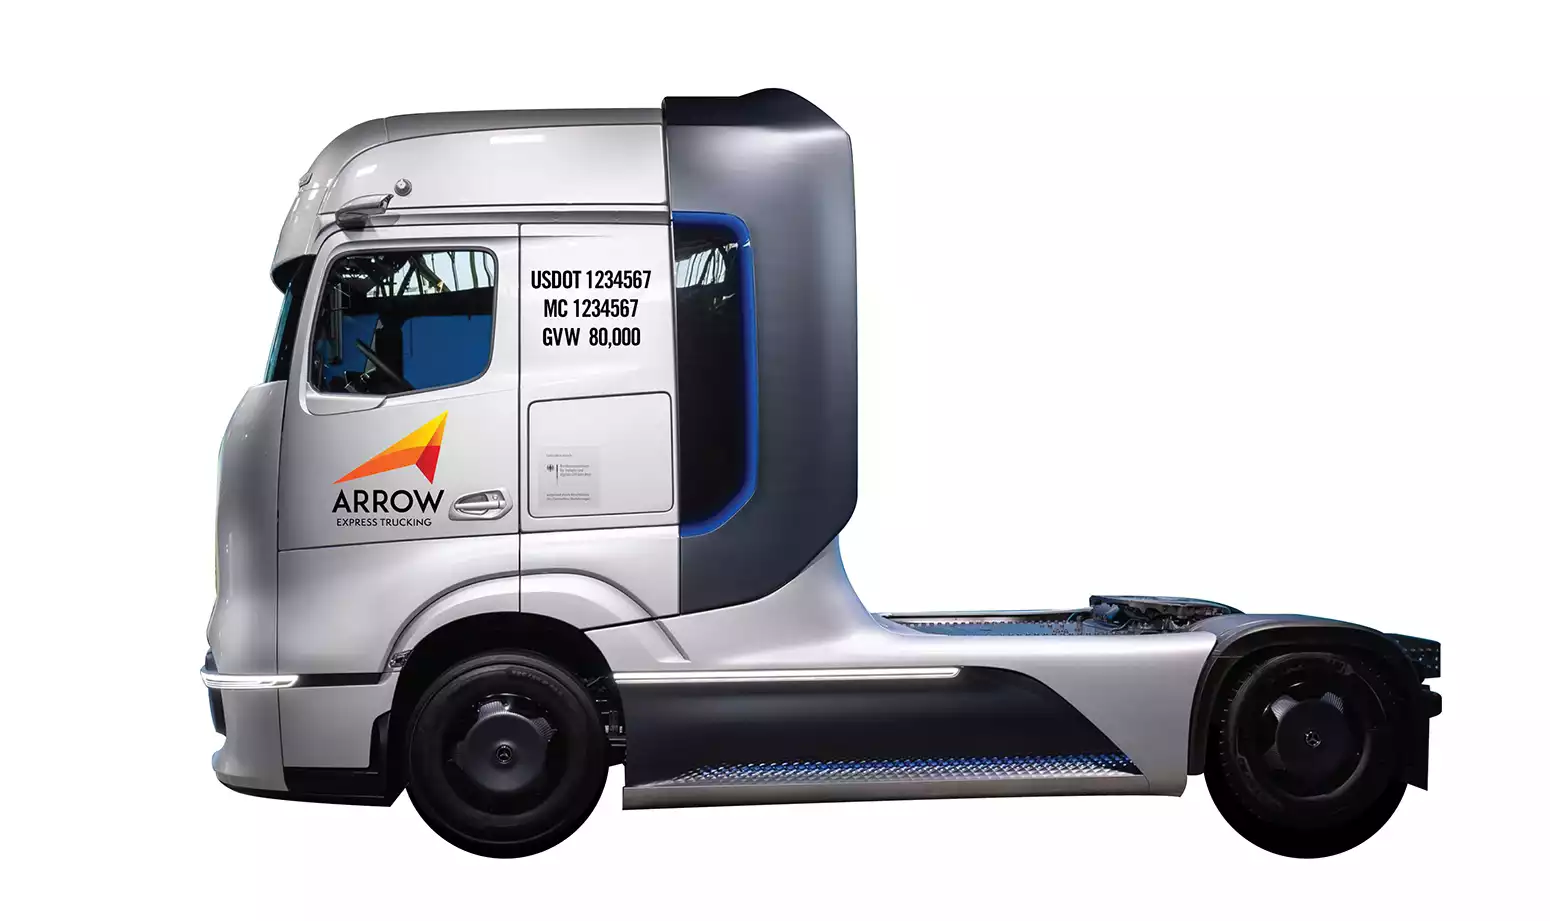 The image portrays a Mercedes Semi-Truck with a vinyl graphics package that enhances its visual appeal and reinforces its branding.